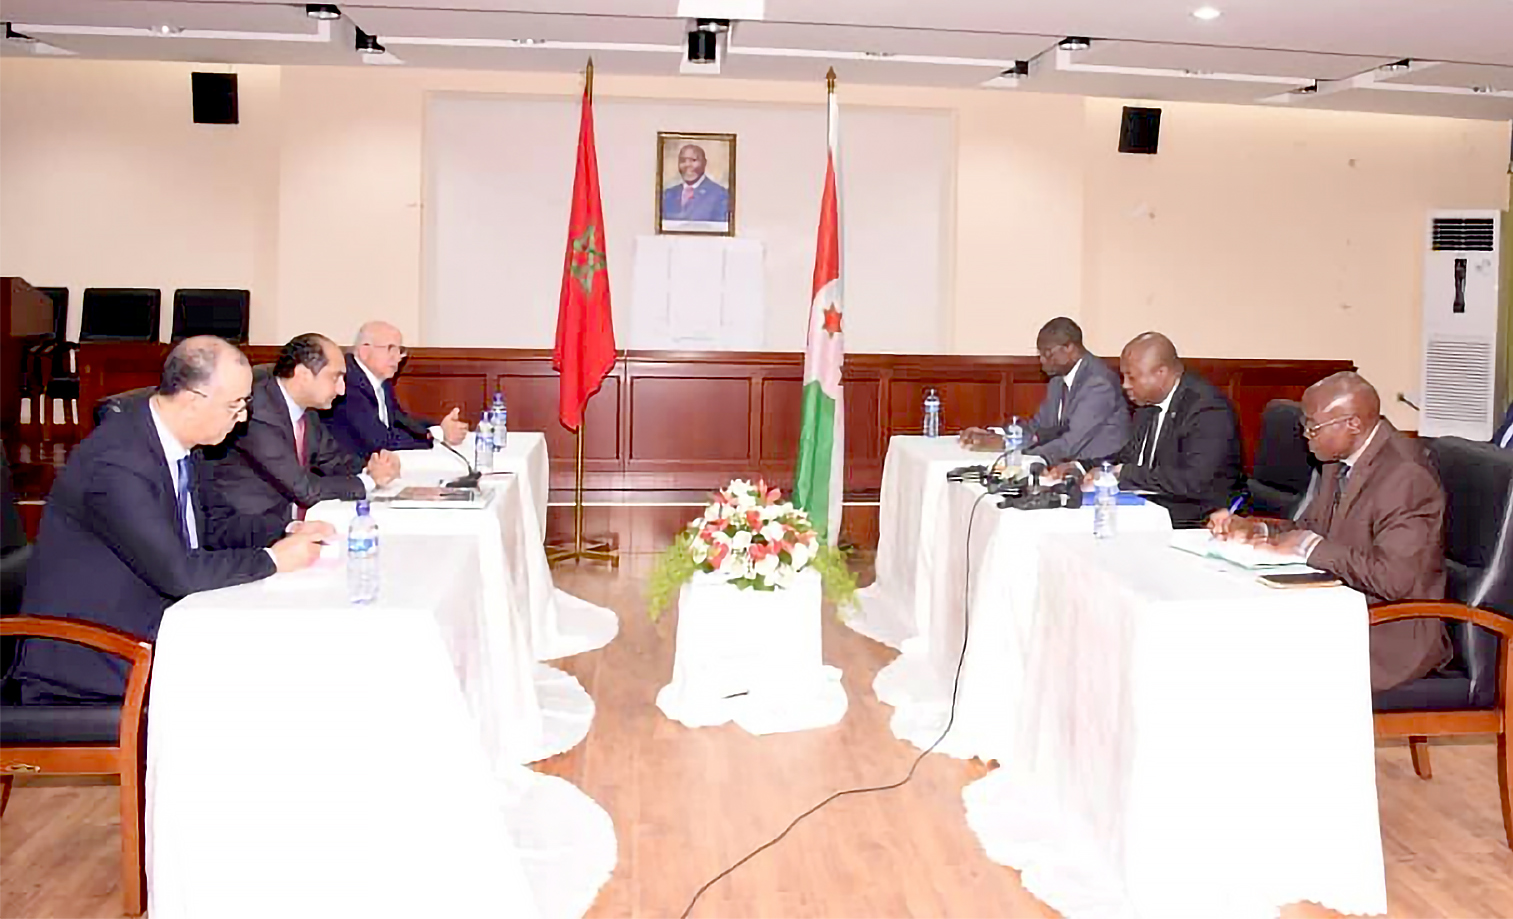 On Thursday, February 18th, the Republic of Burundi welcomed Morocco’s decision to open an embassy in the country.